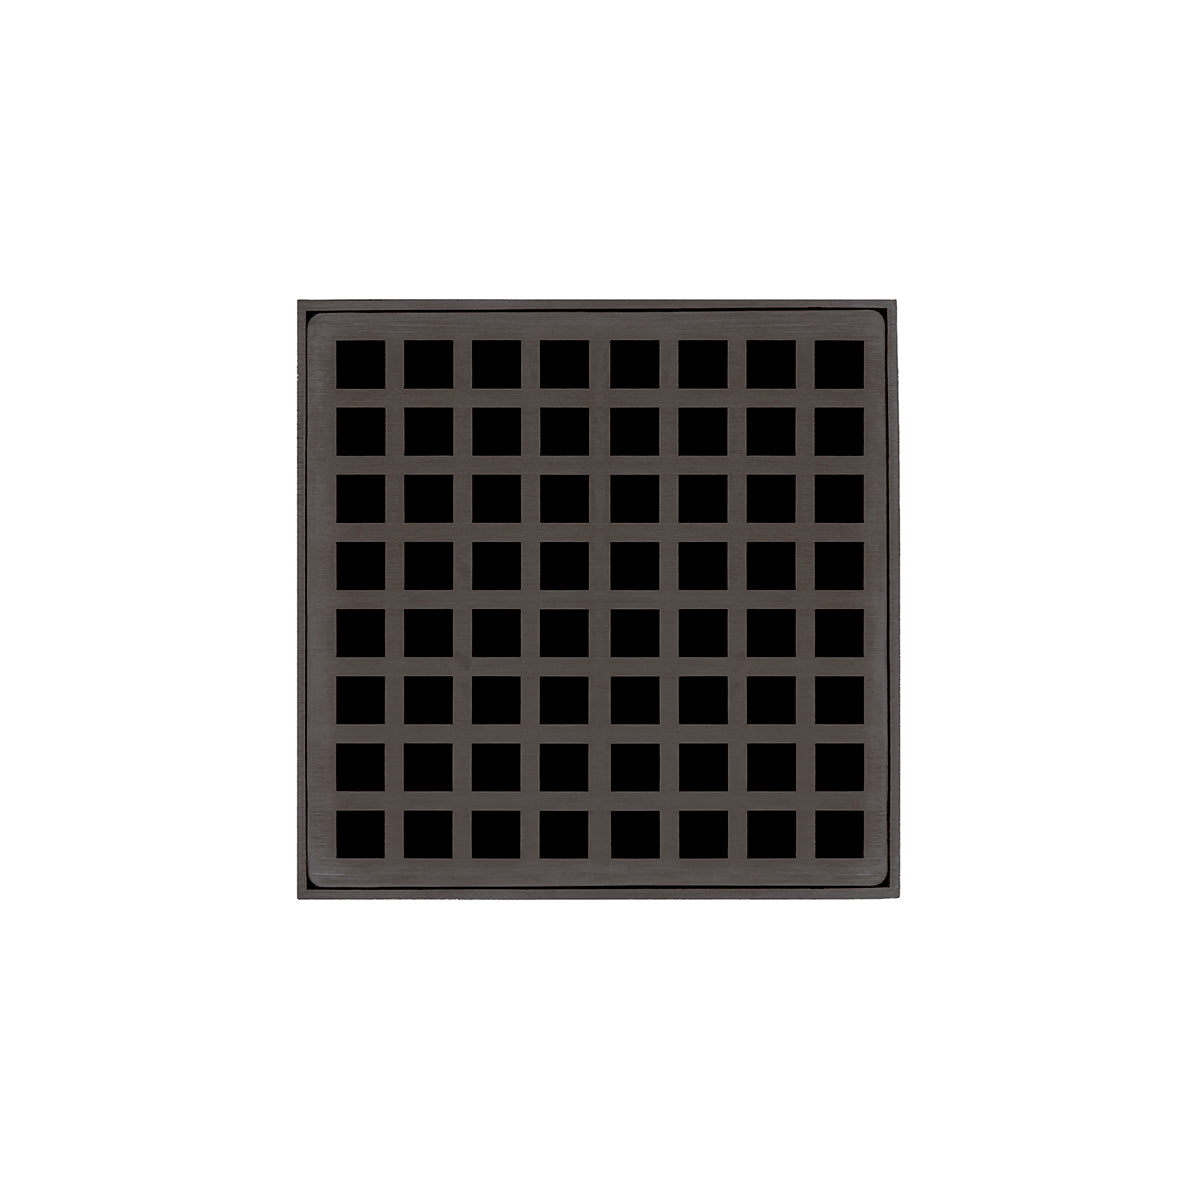 Infinity Drain 5" x 5" QD 5 Premium Center Drain Kit with Squares Pattern Decorative Plate with Cast Iron Drain Body for Hot Mop, 2" Outlet